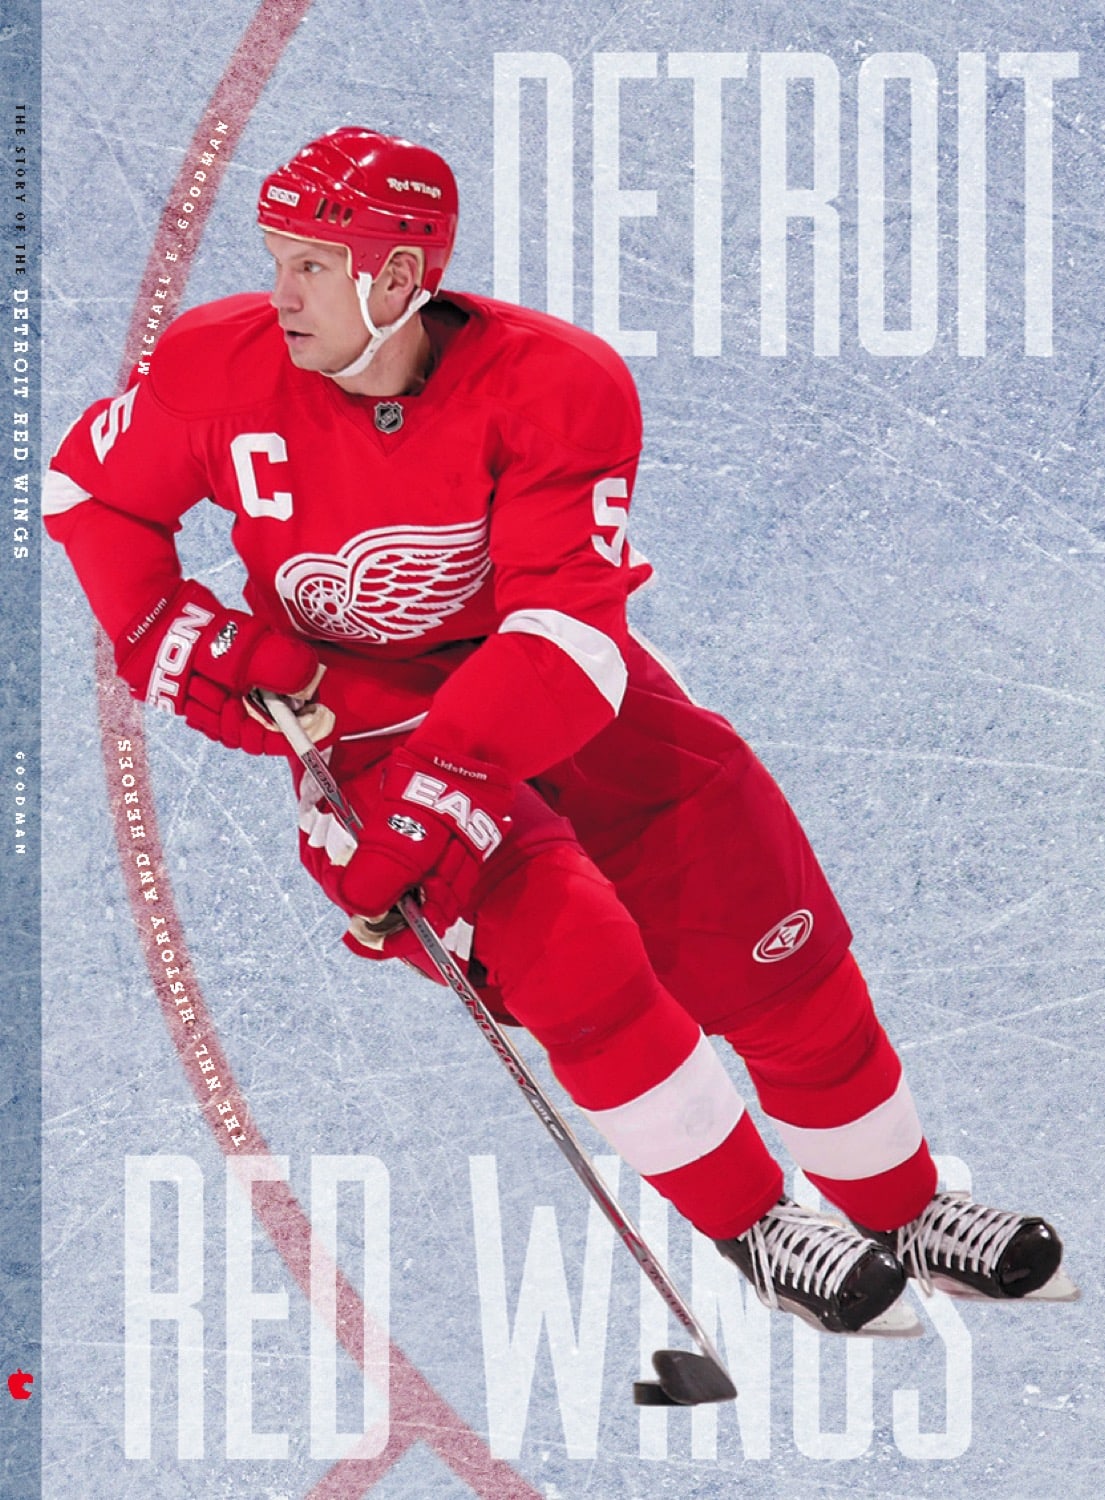 The NHL: History and Heroes: The Story of the Detroit Red Wings